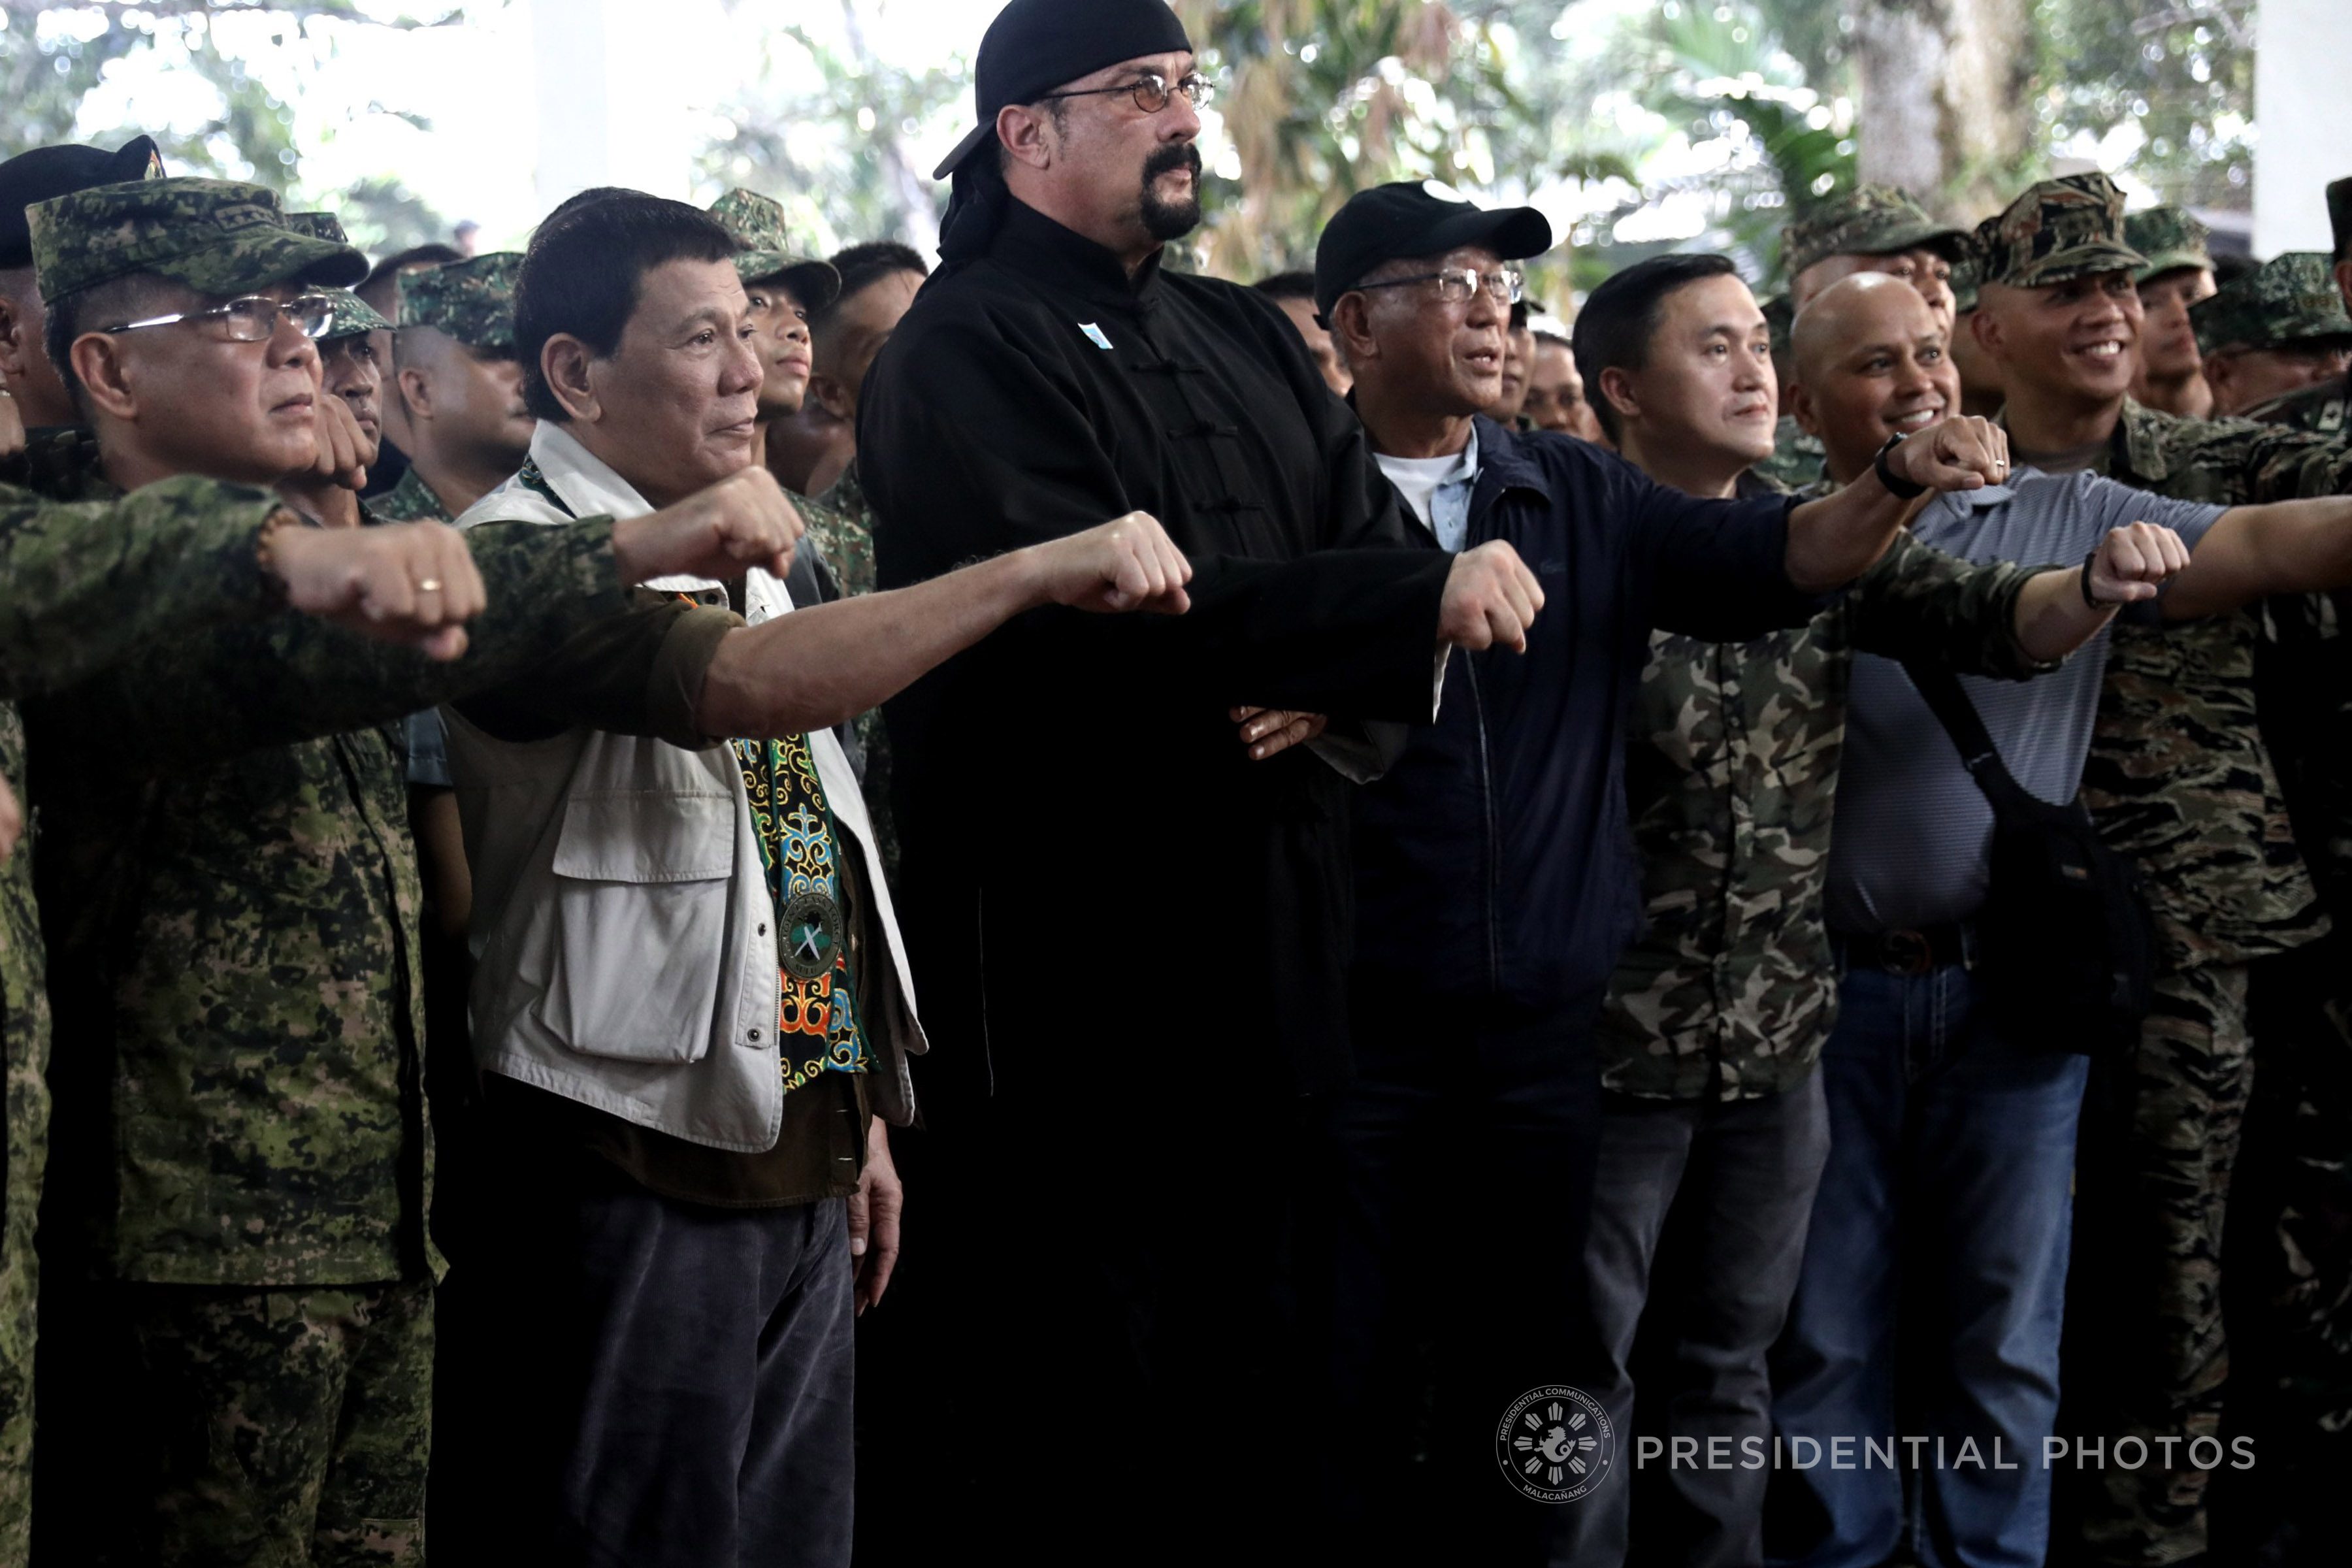 US ACTION HERO. President Rodrigo Duterte flashes his signature pose with Hollywood actor Steven Seagal and military officials during a camp visit in Jolo, Sulu, on December 1, 2017. Presidential Photo   